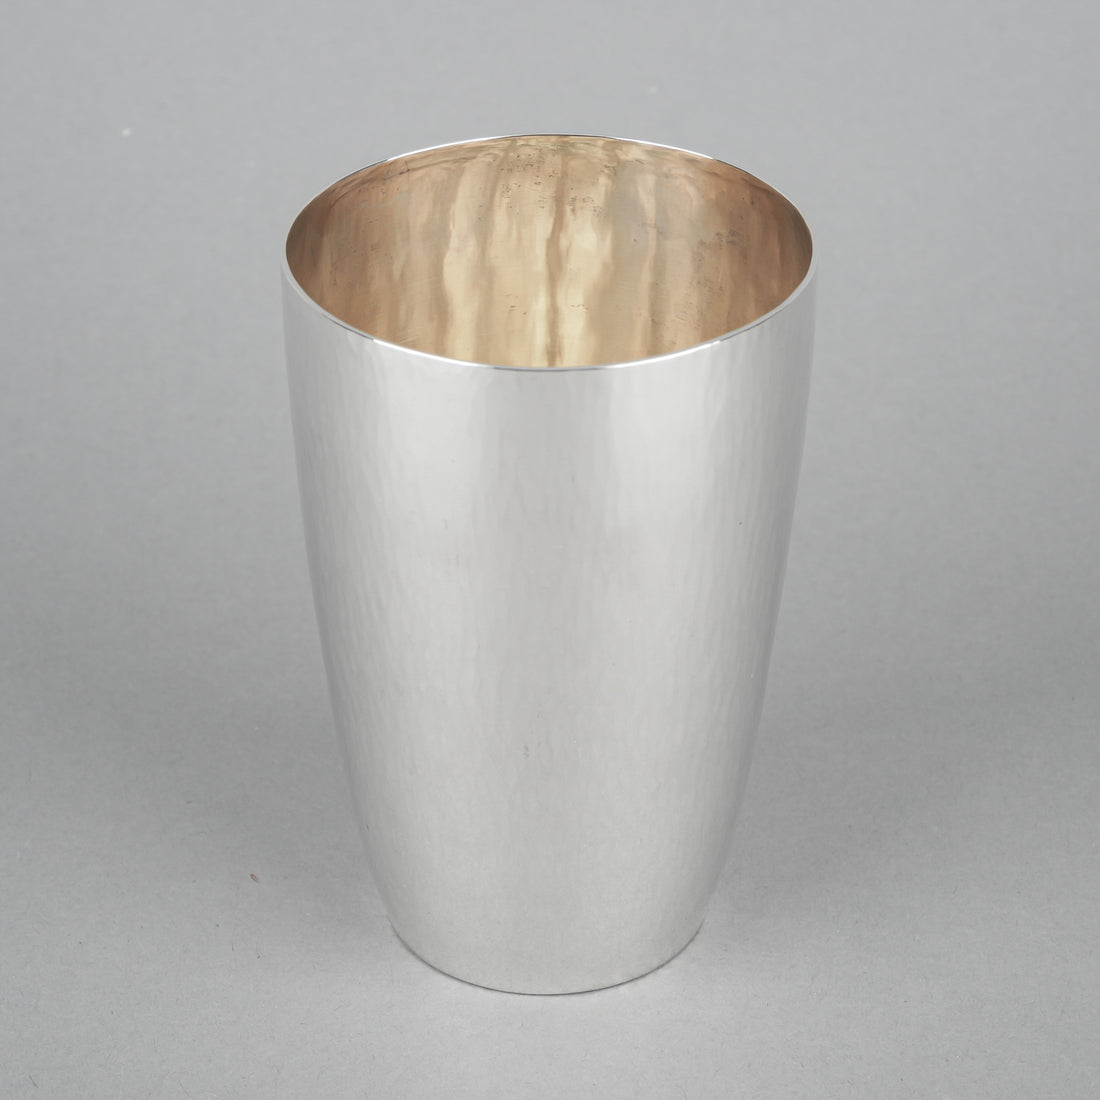 JAKOB GRIMMINGER 800 Silver Tumbler with Gold Wash